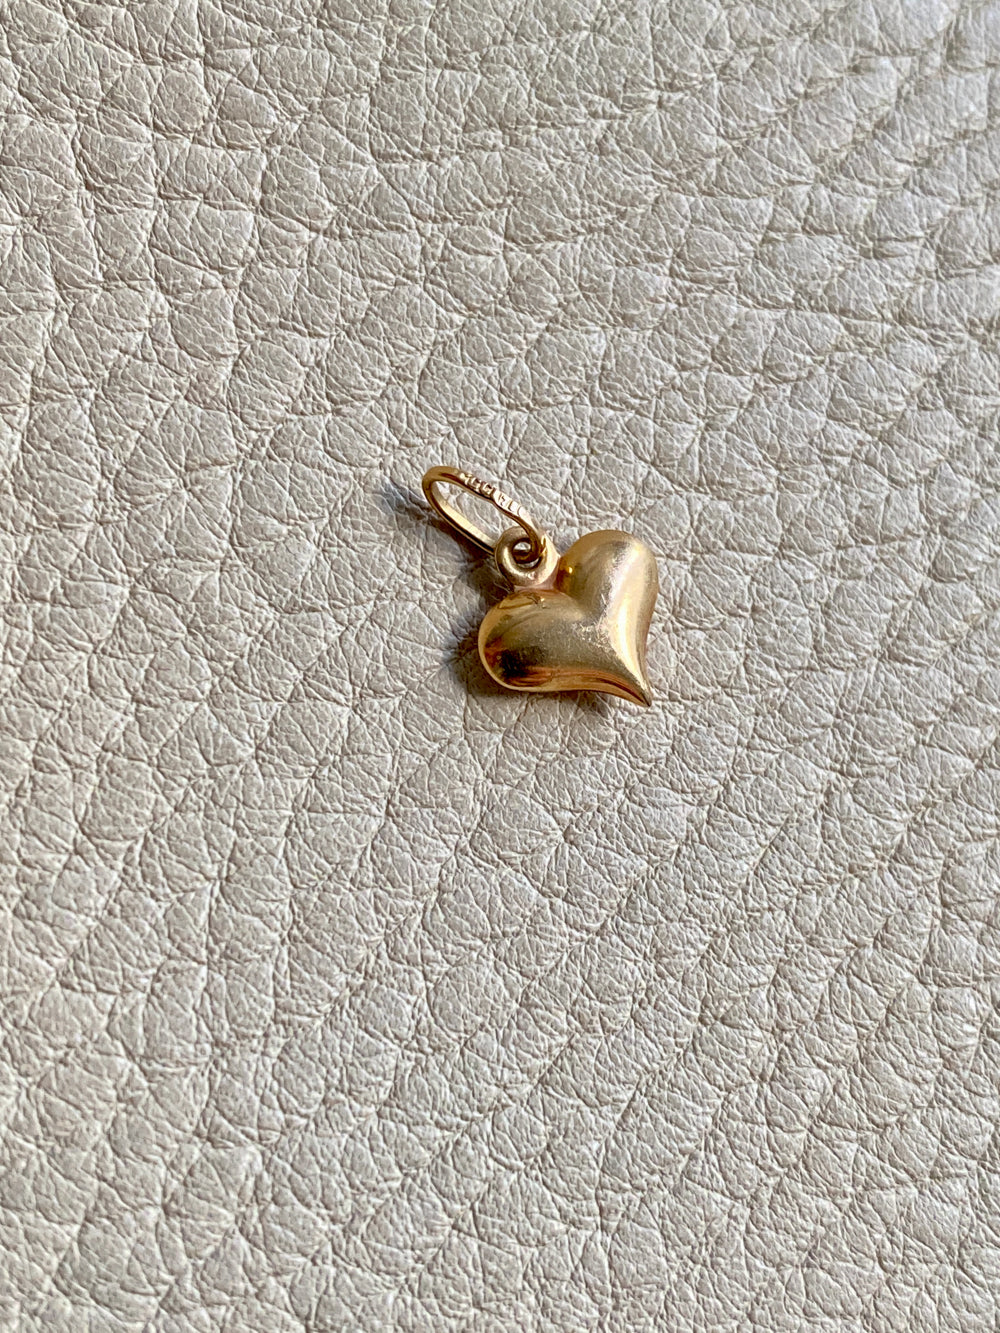 18k gold vintage charm or pendant - Small Puffy Heart